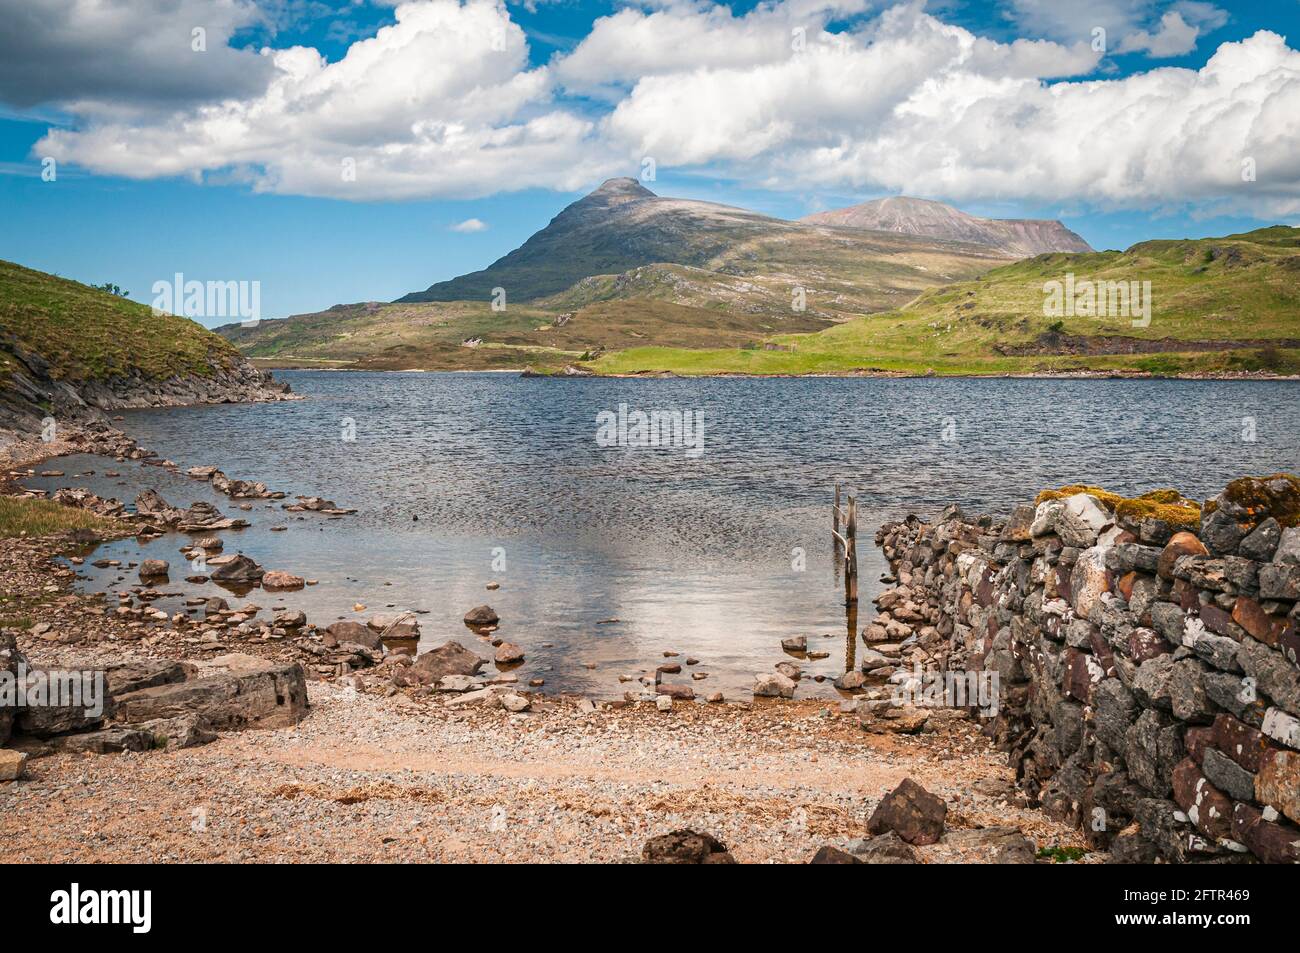 A sunny, summer, 3 shot HDR image of the distant mass that is Quinag, from Loch Assynt in Sutherland, Scotland. 27 May 2014 Stock Photo